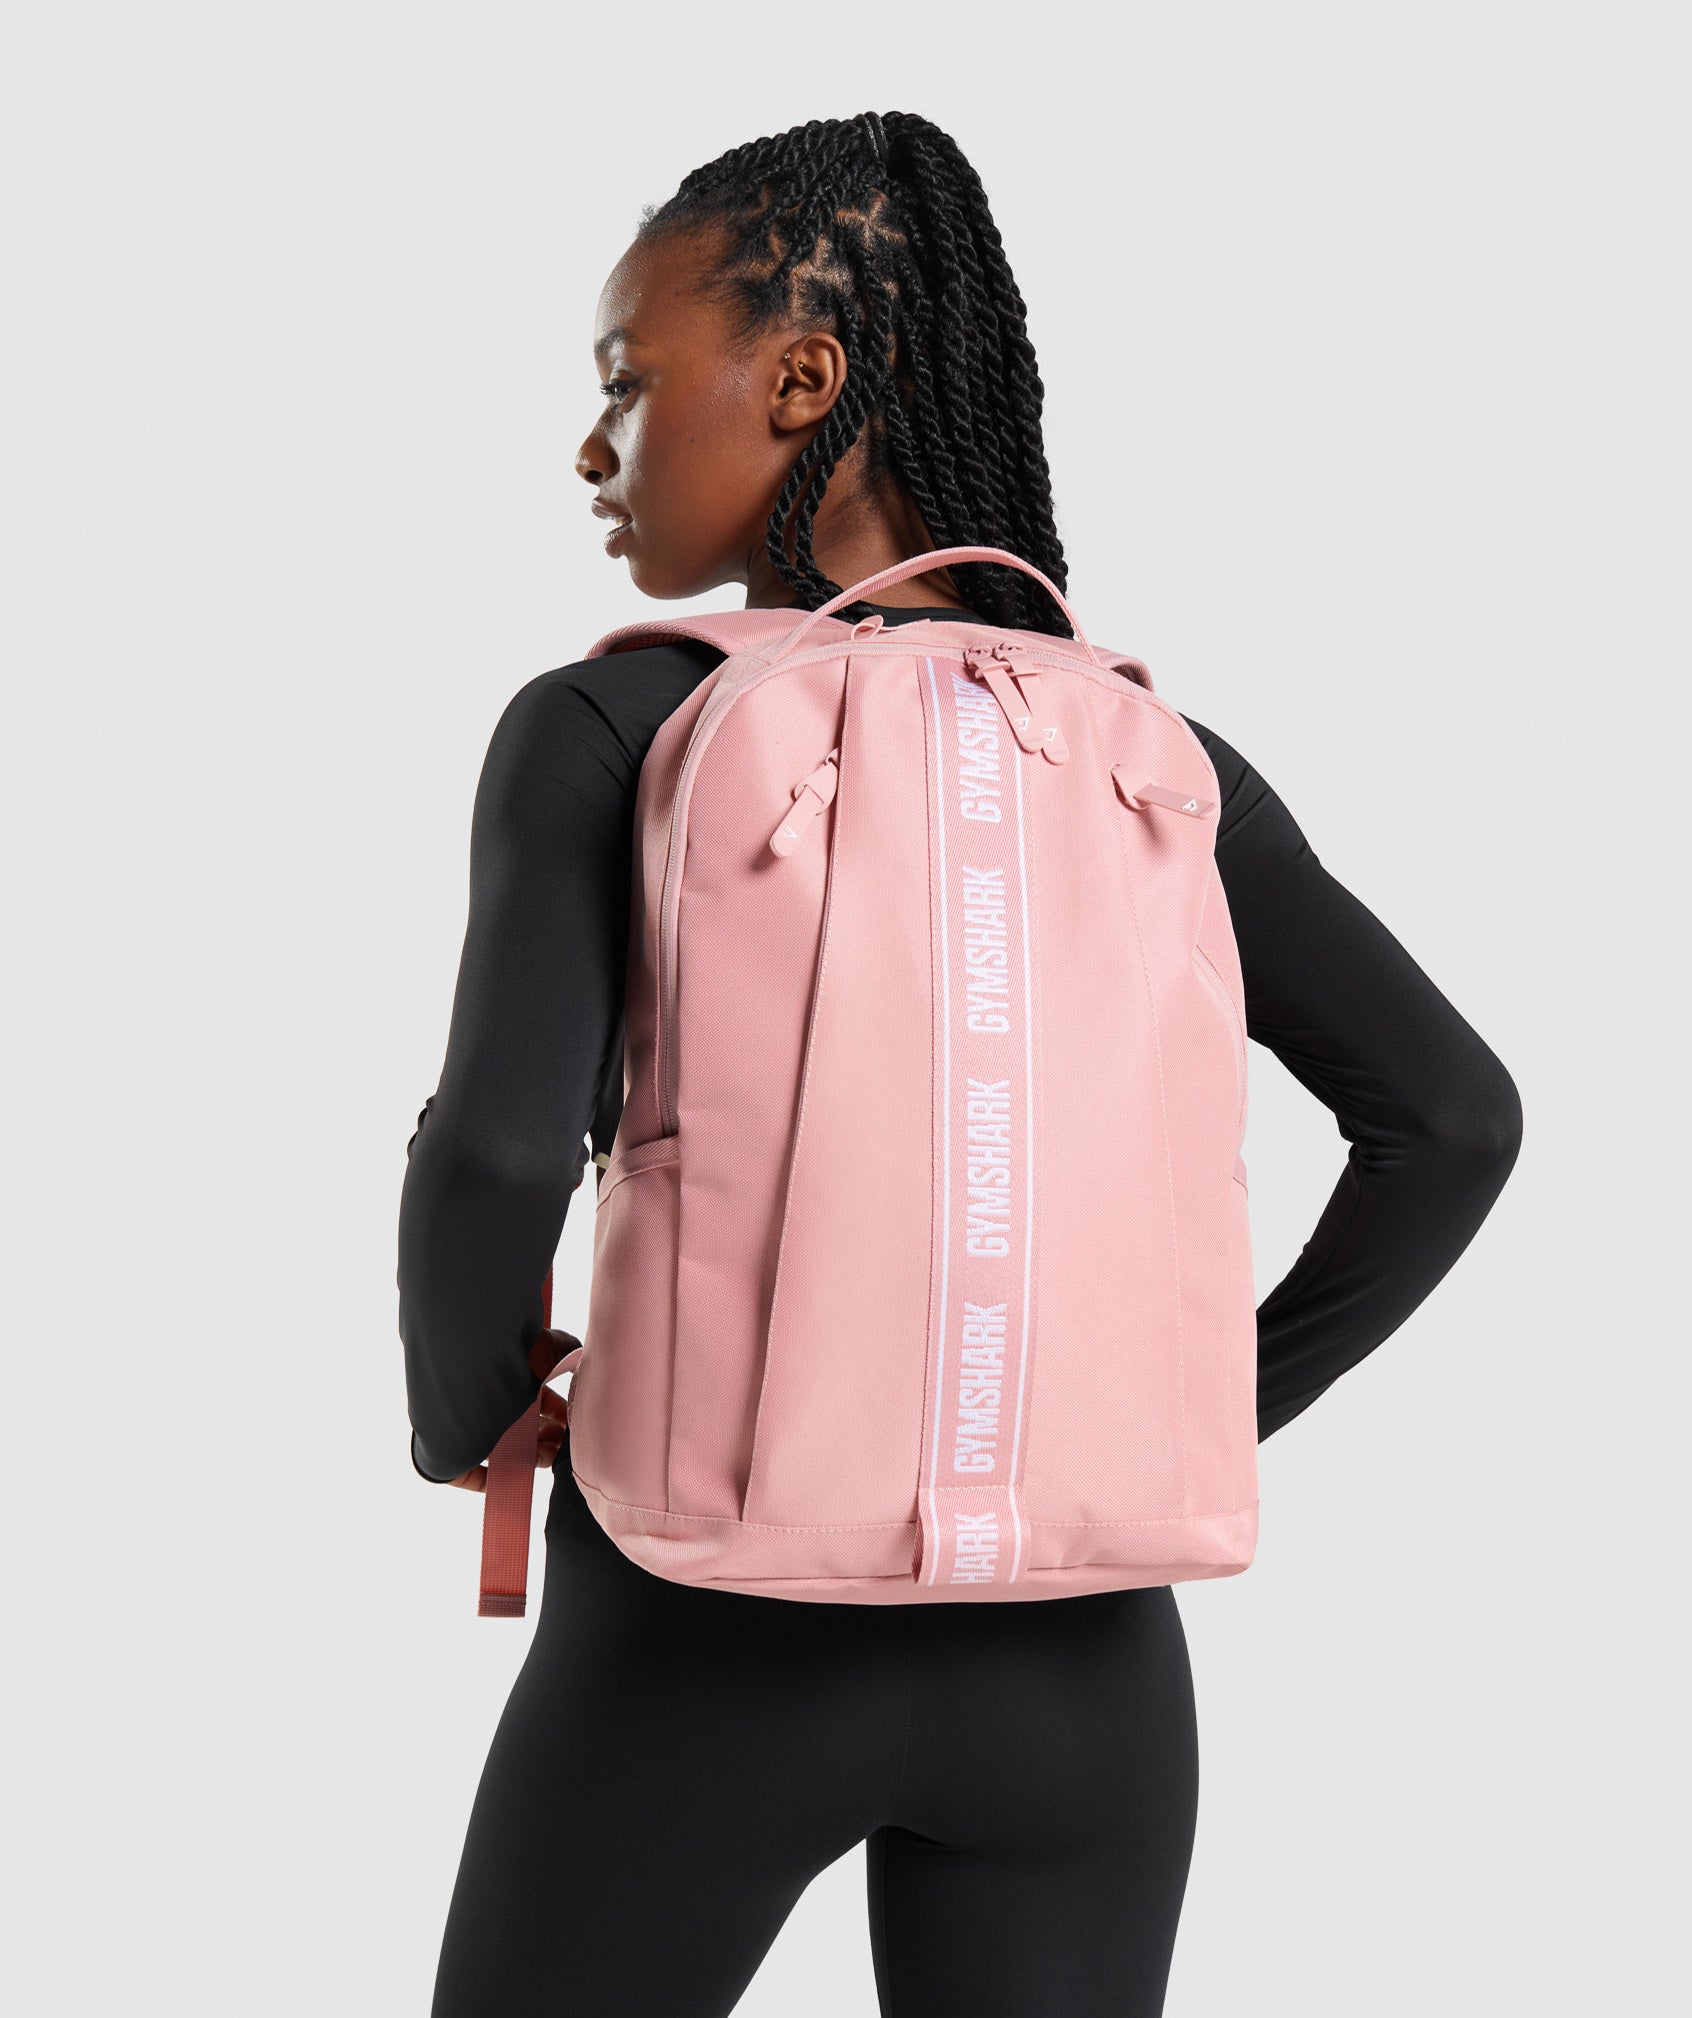 Taped Backpack in Pink - view 2